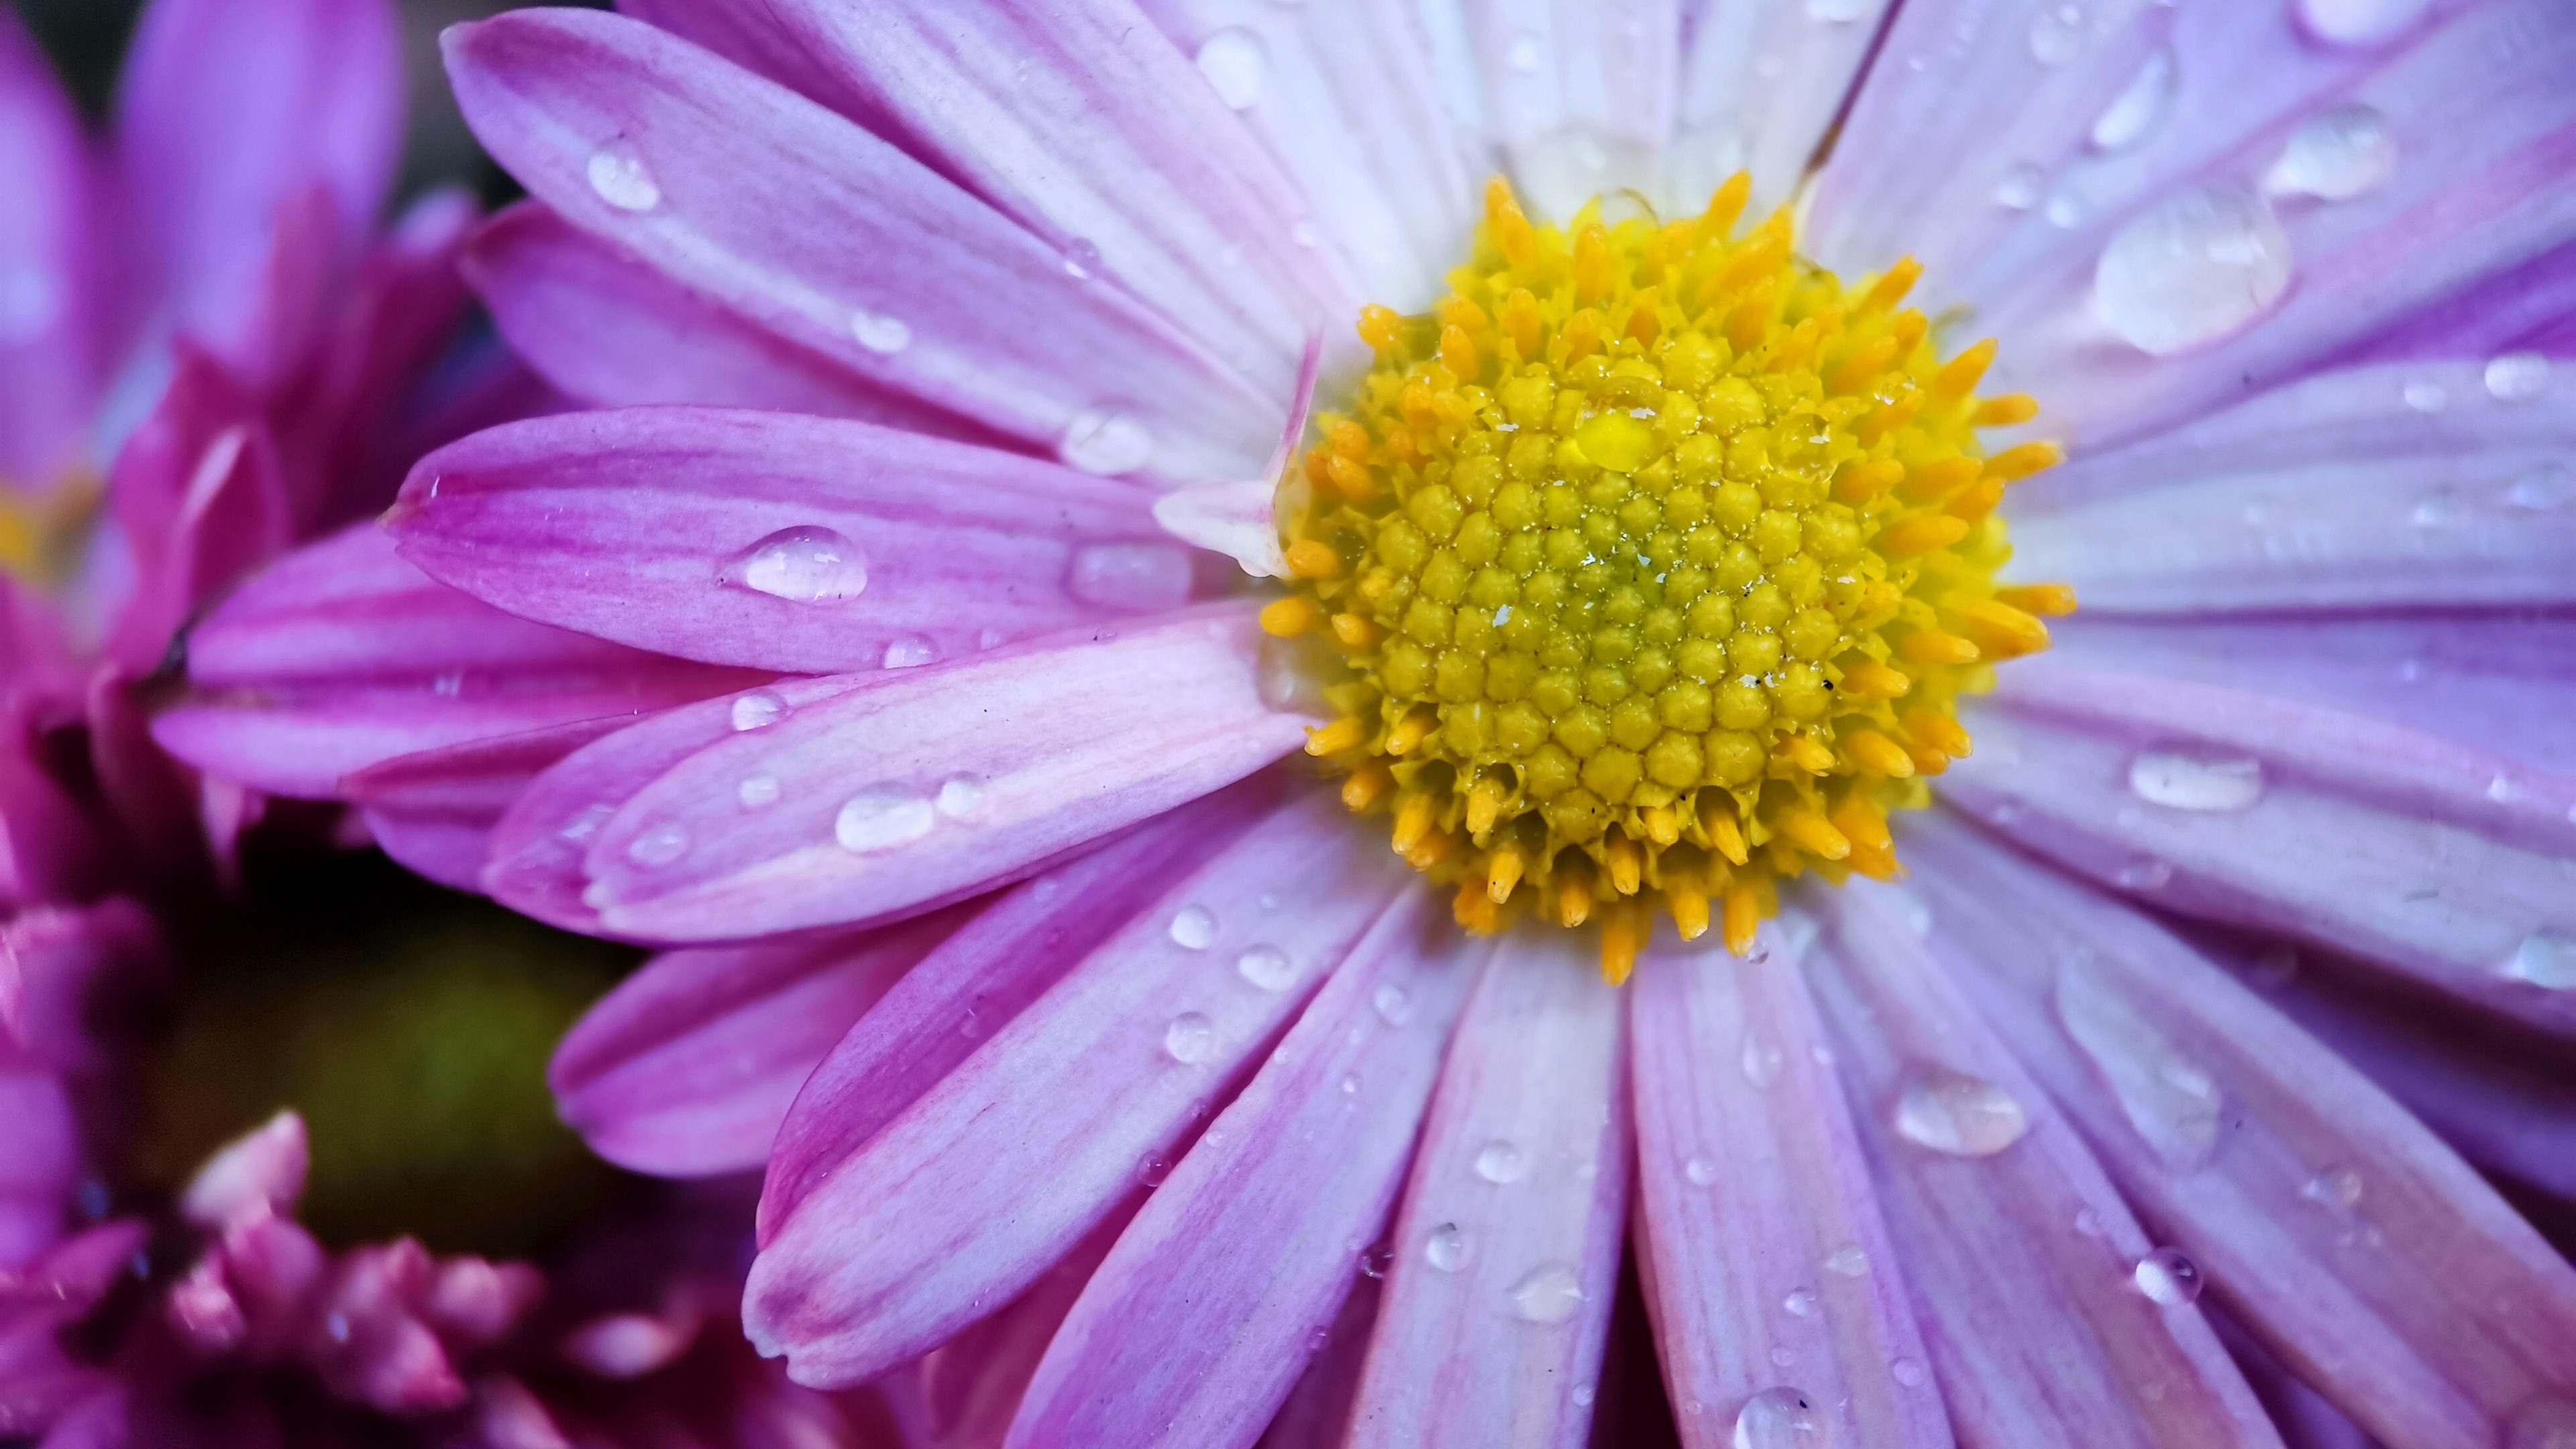 Pink chrysanthemum with water drops on petals